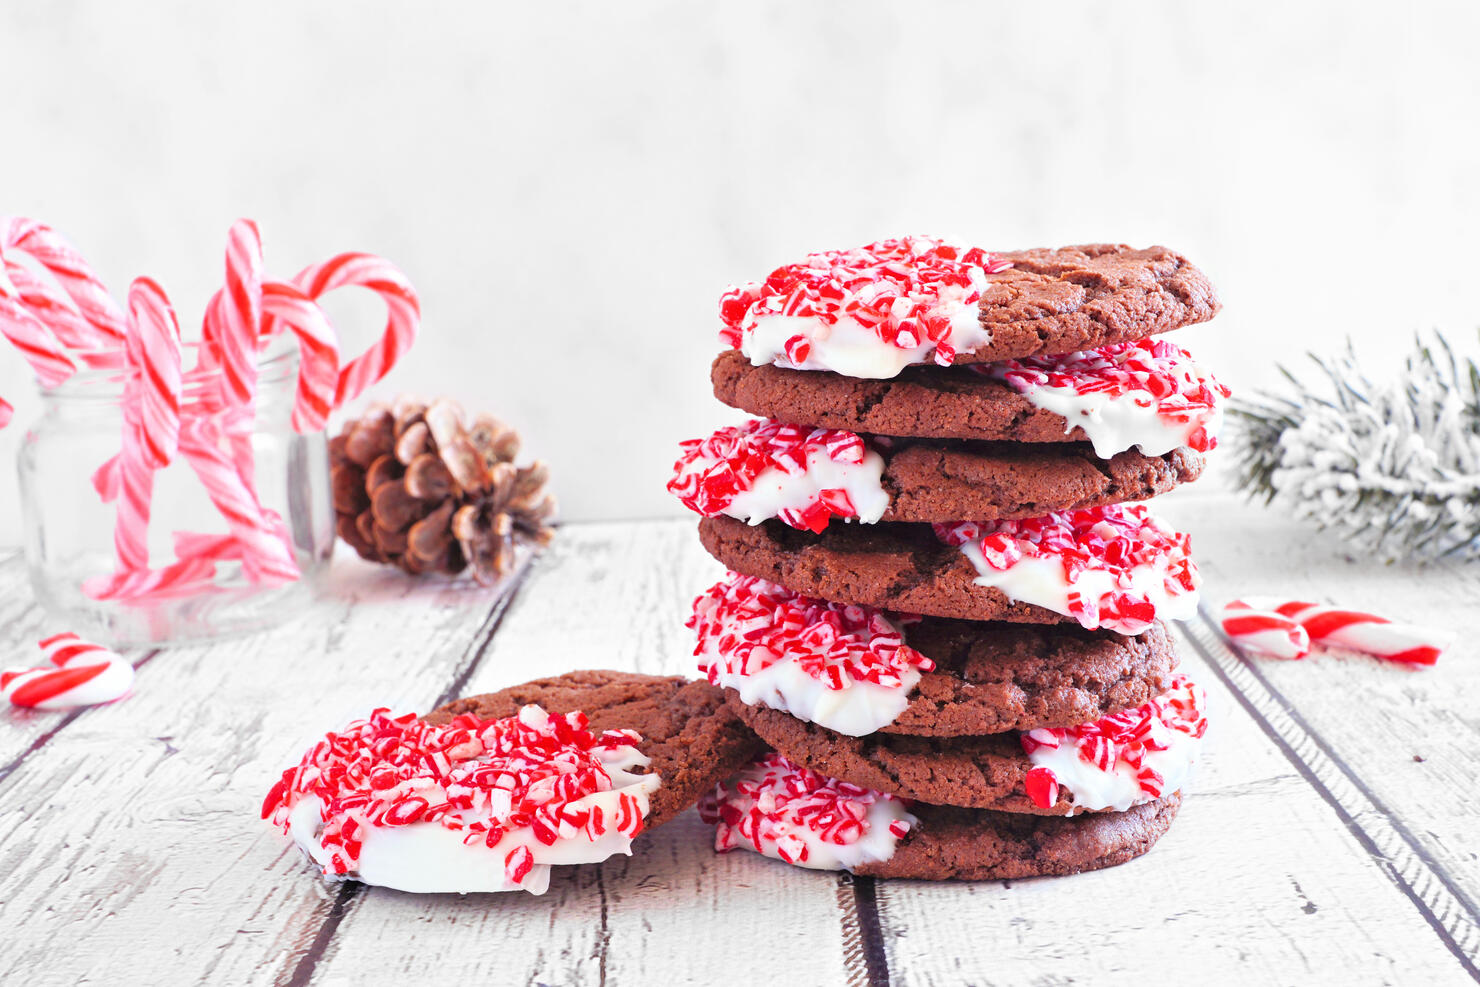 Stack of Christmas chocolate candy cane cookies. Table scene with a white background.